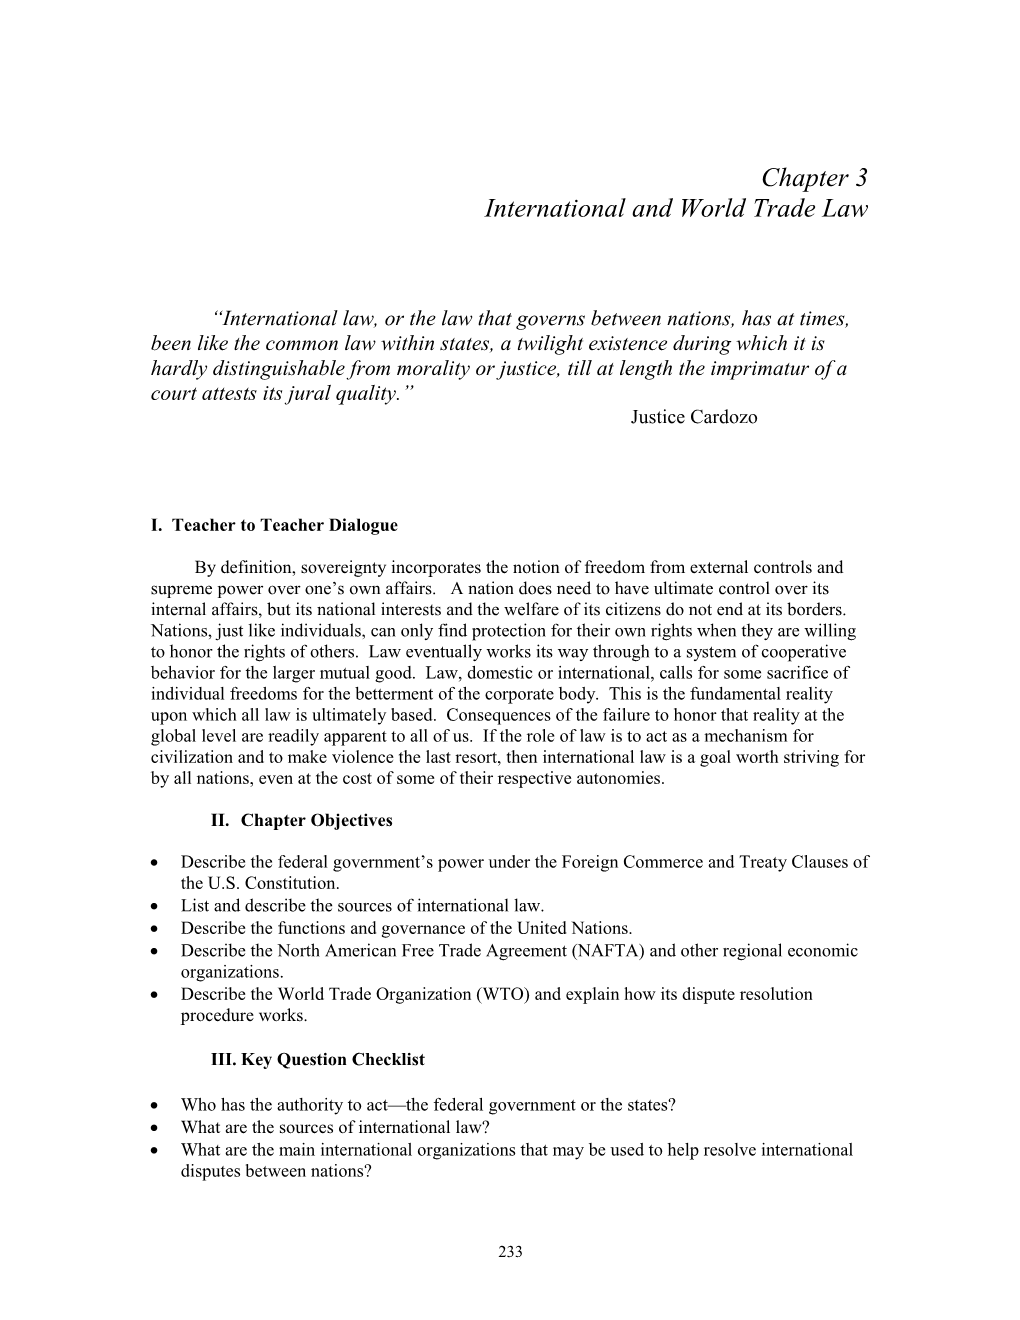 International and World Trade Law